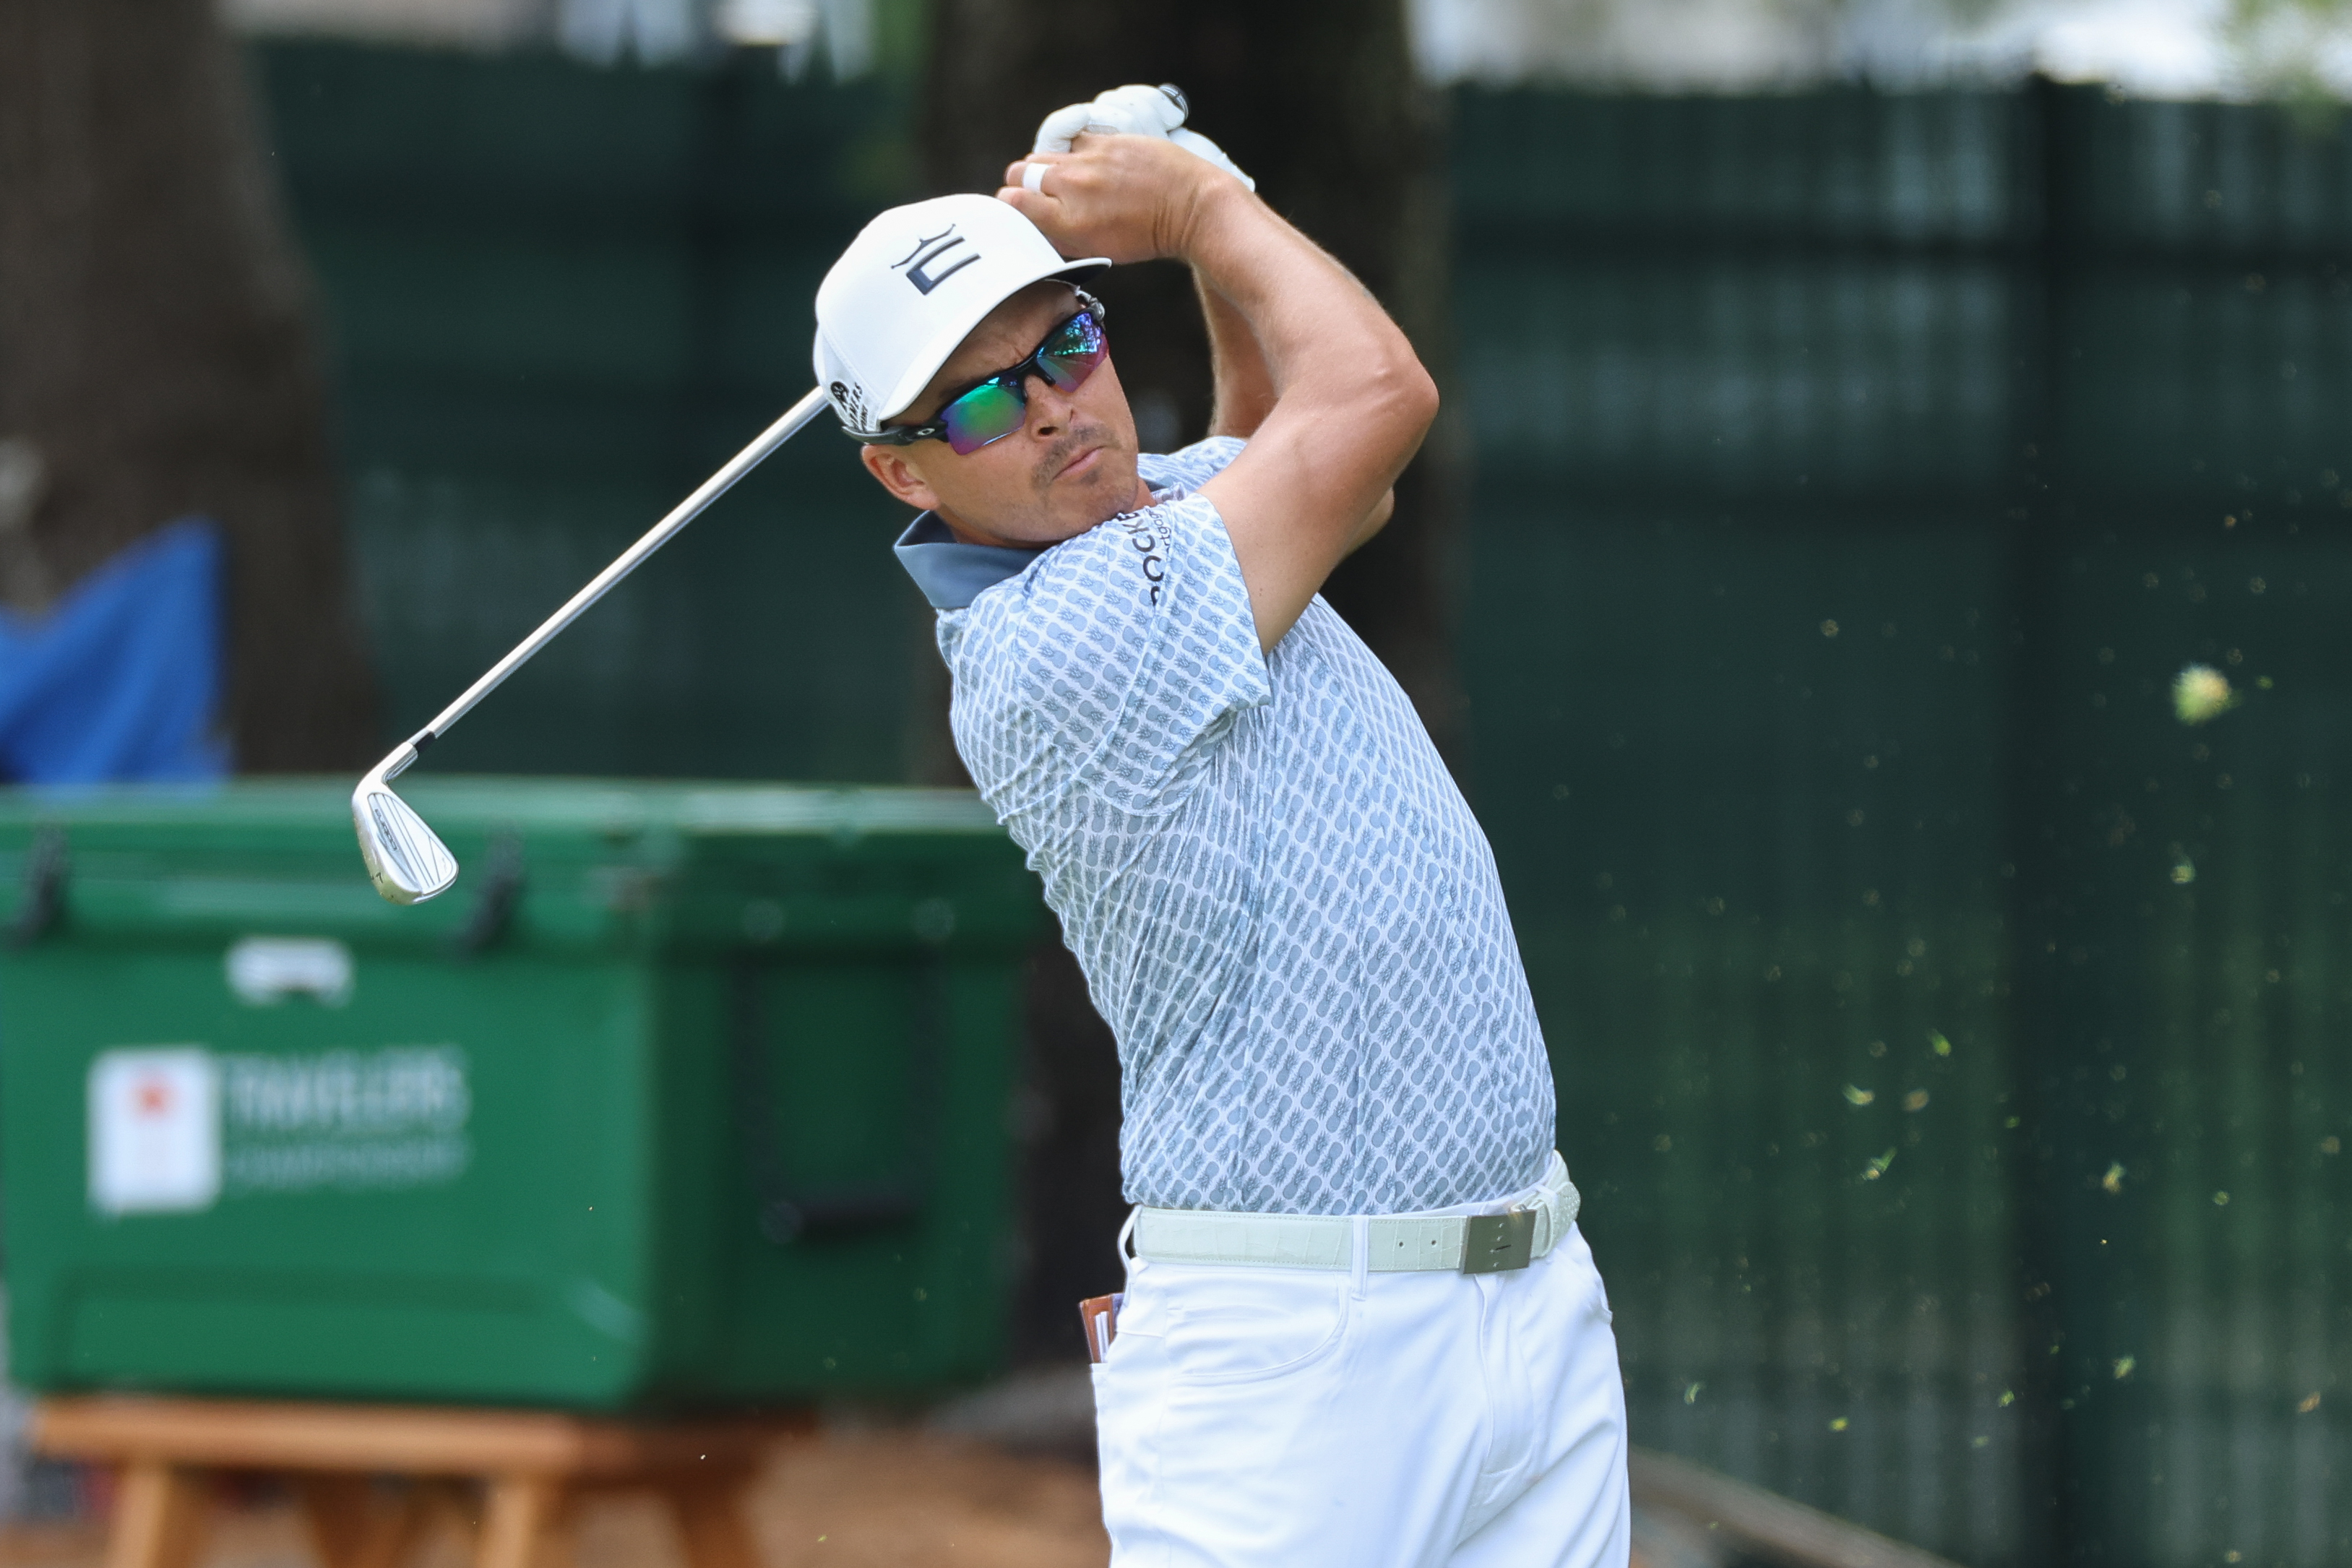 Rocket Mortgage Classic odds and predictions Rickie Fowler